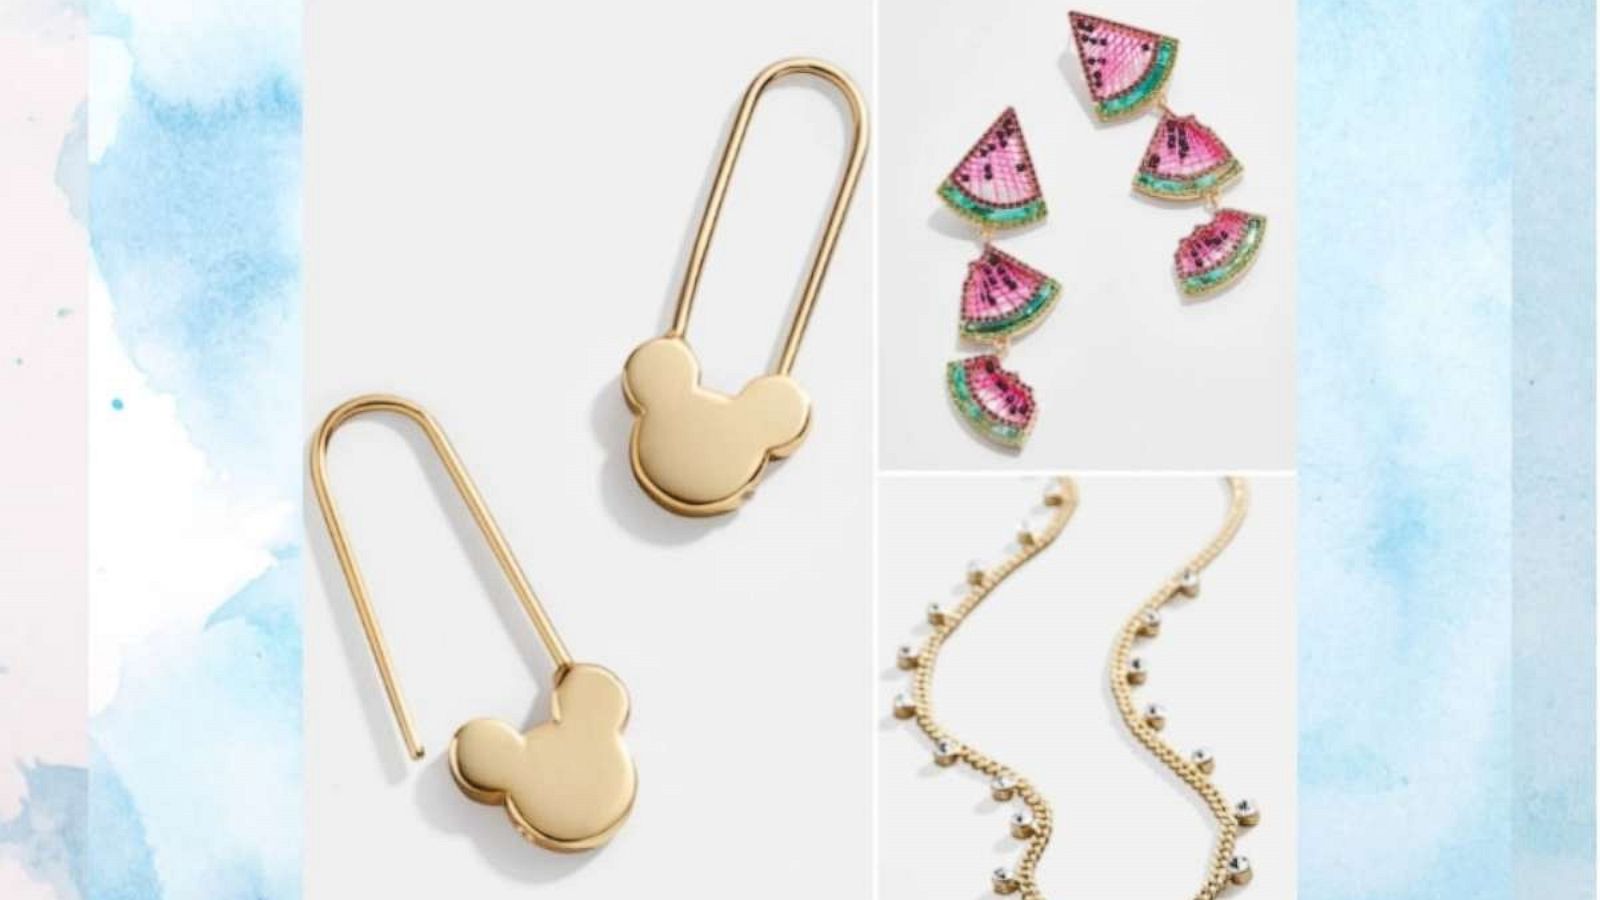 BaubleBar 4th of July sale: Save big on accessories, jewels and